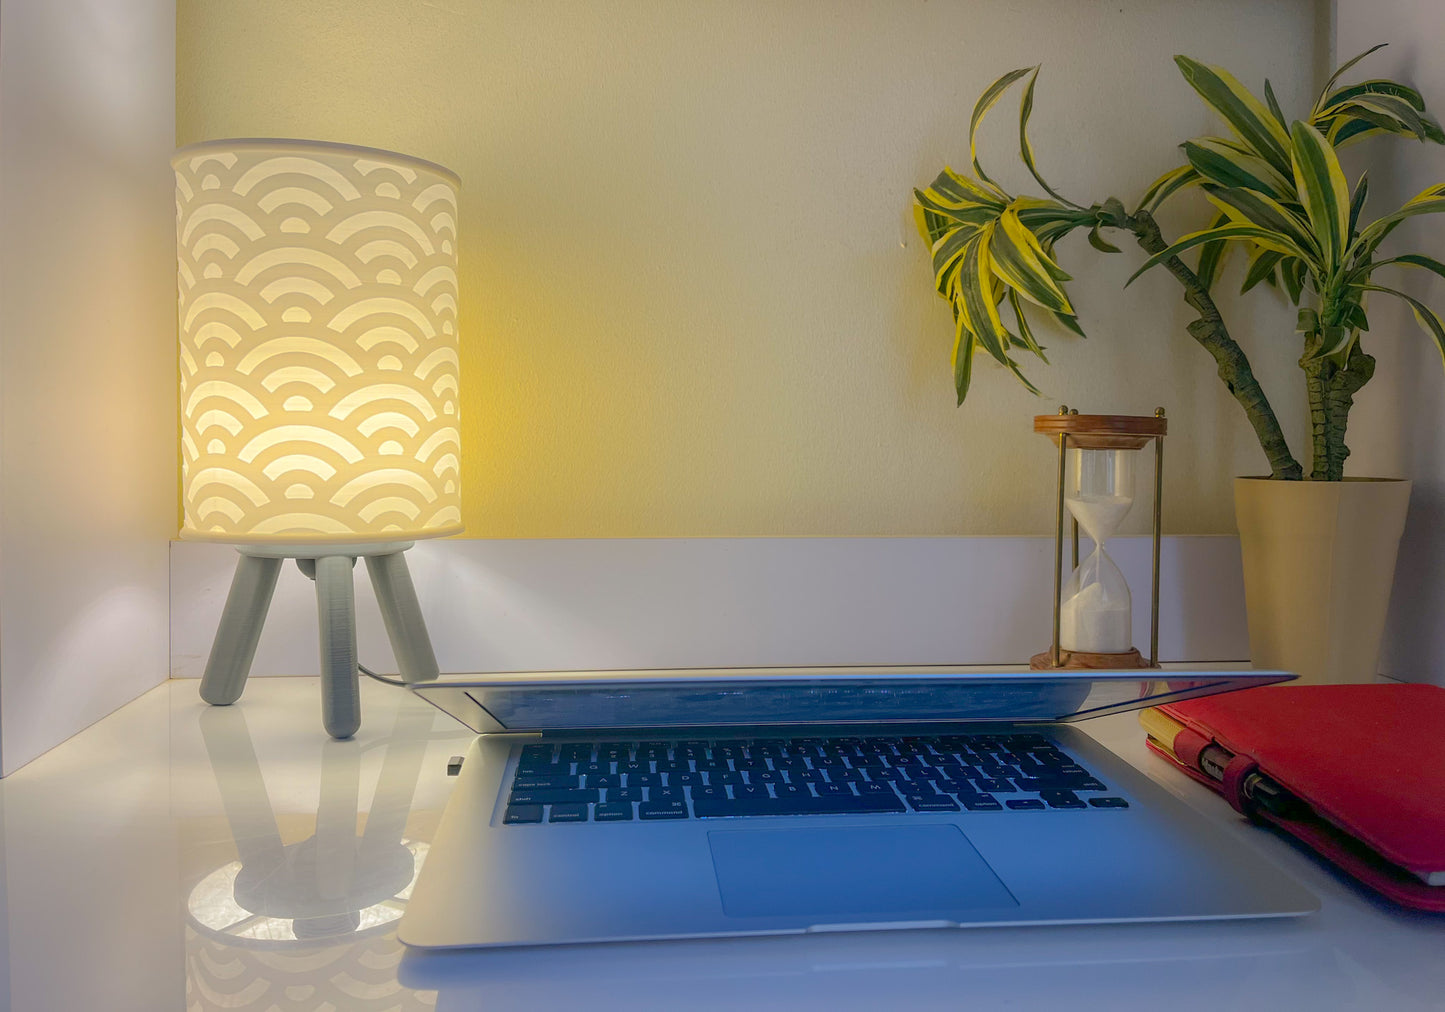 3D printed Duule bedside/table lamp on a reading desk